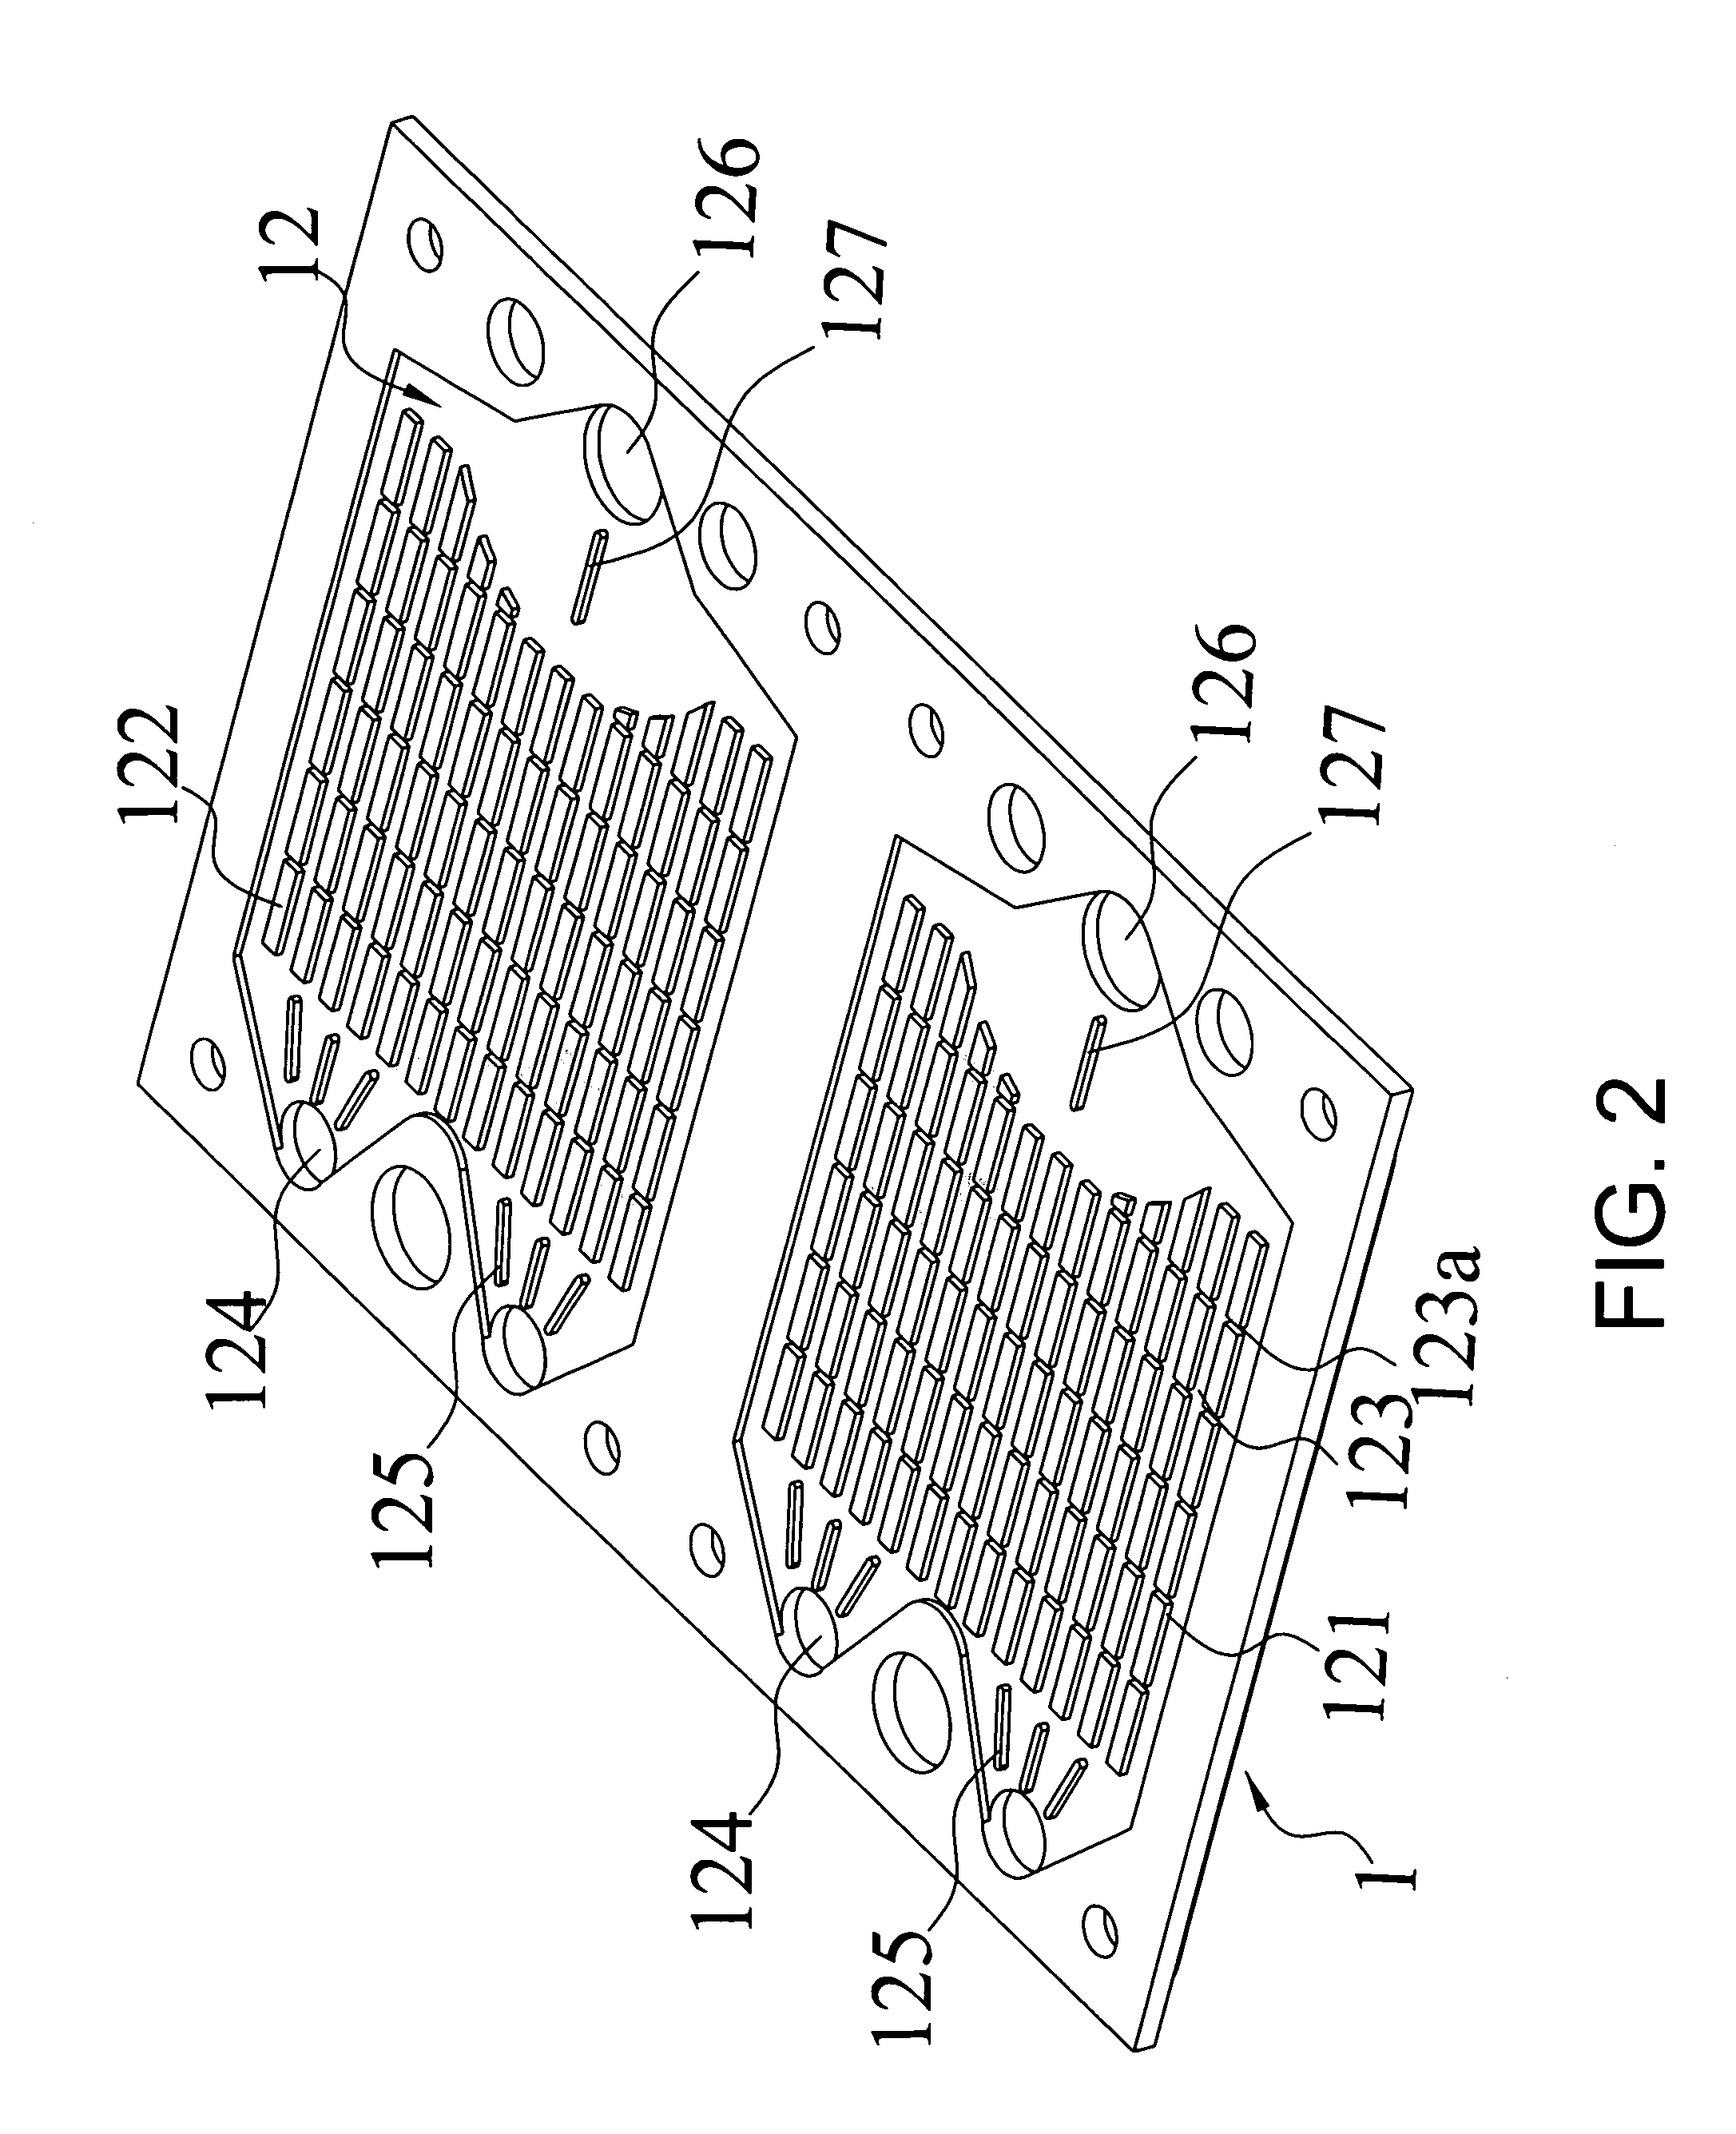 Interconnect set of planar solid oxide fuel cell having flow paths